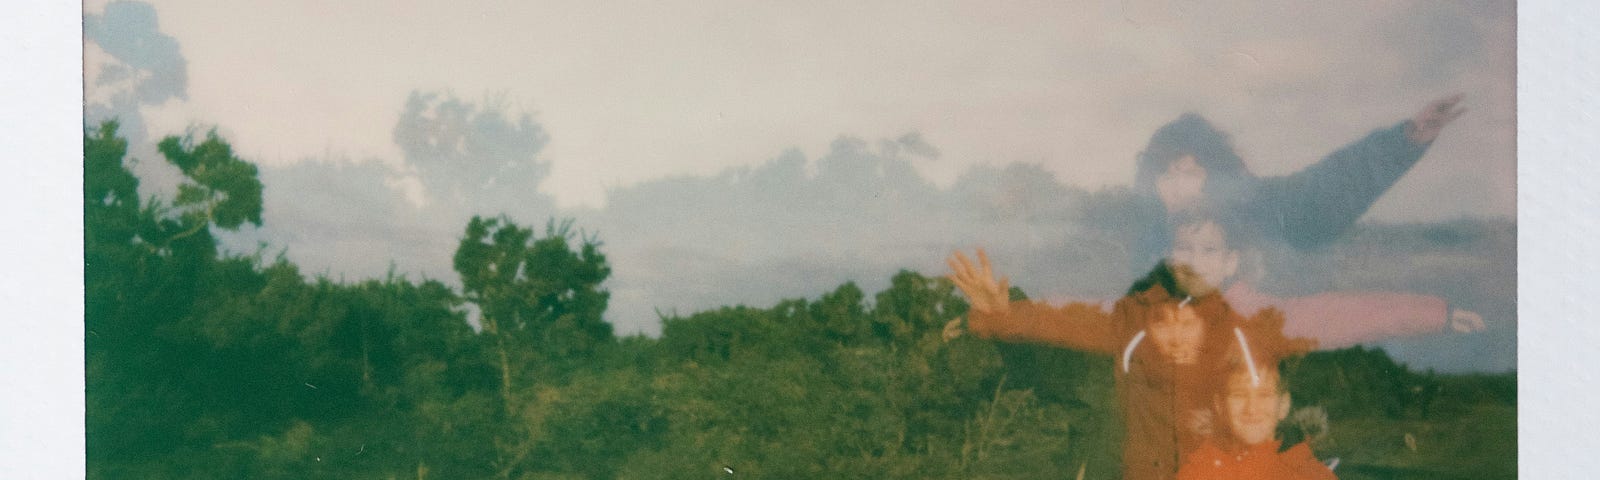 A Polaroid picture reveals some people obscured from view by their movements amid a foggy backdrop.